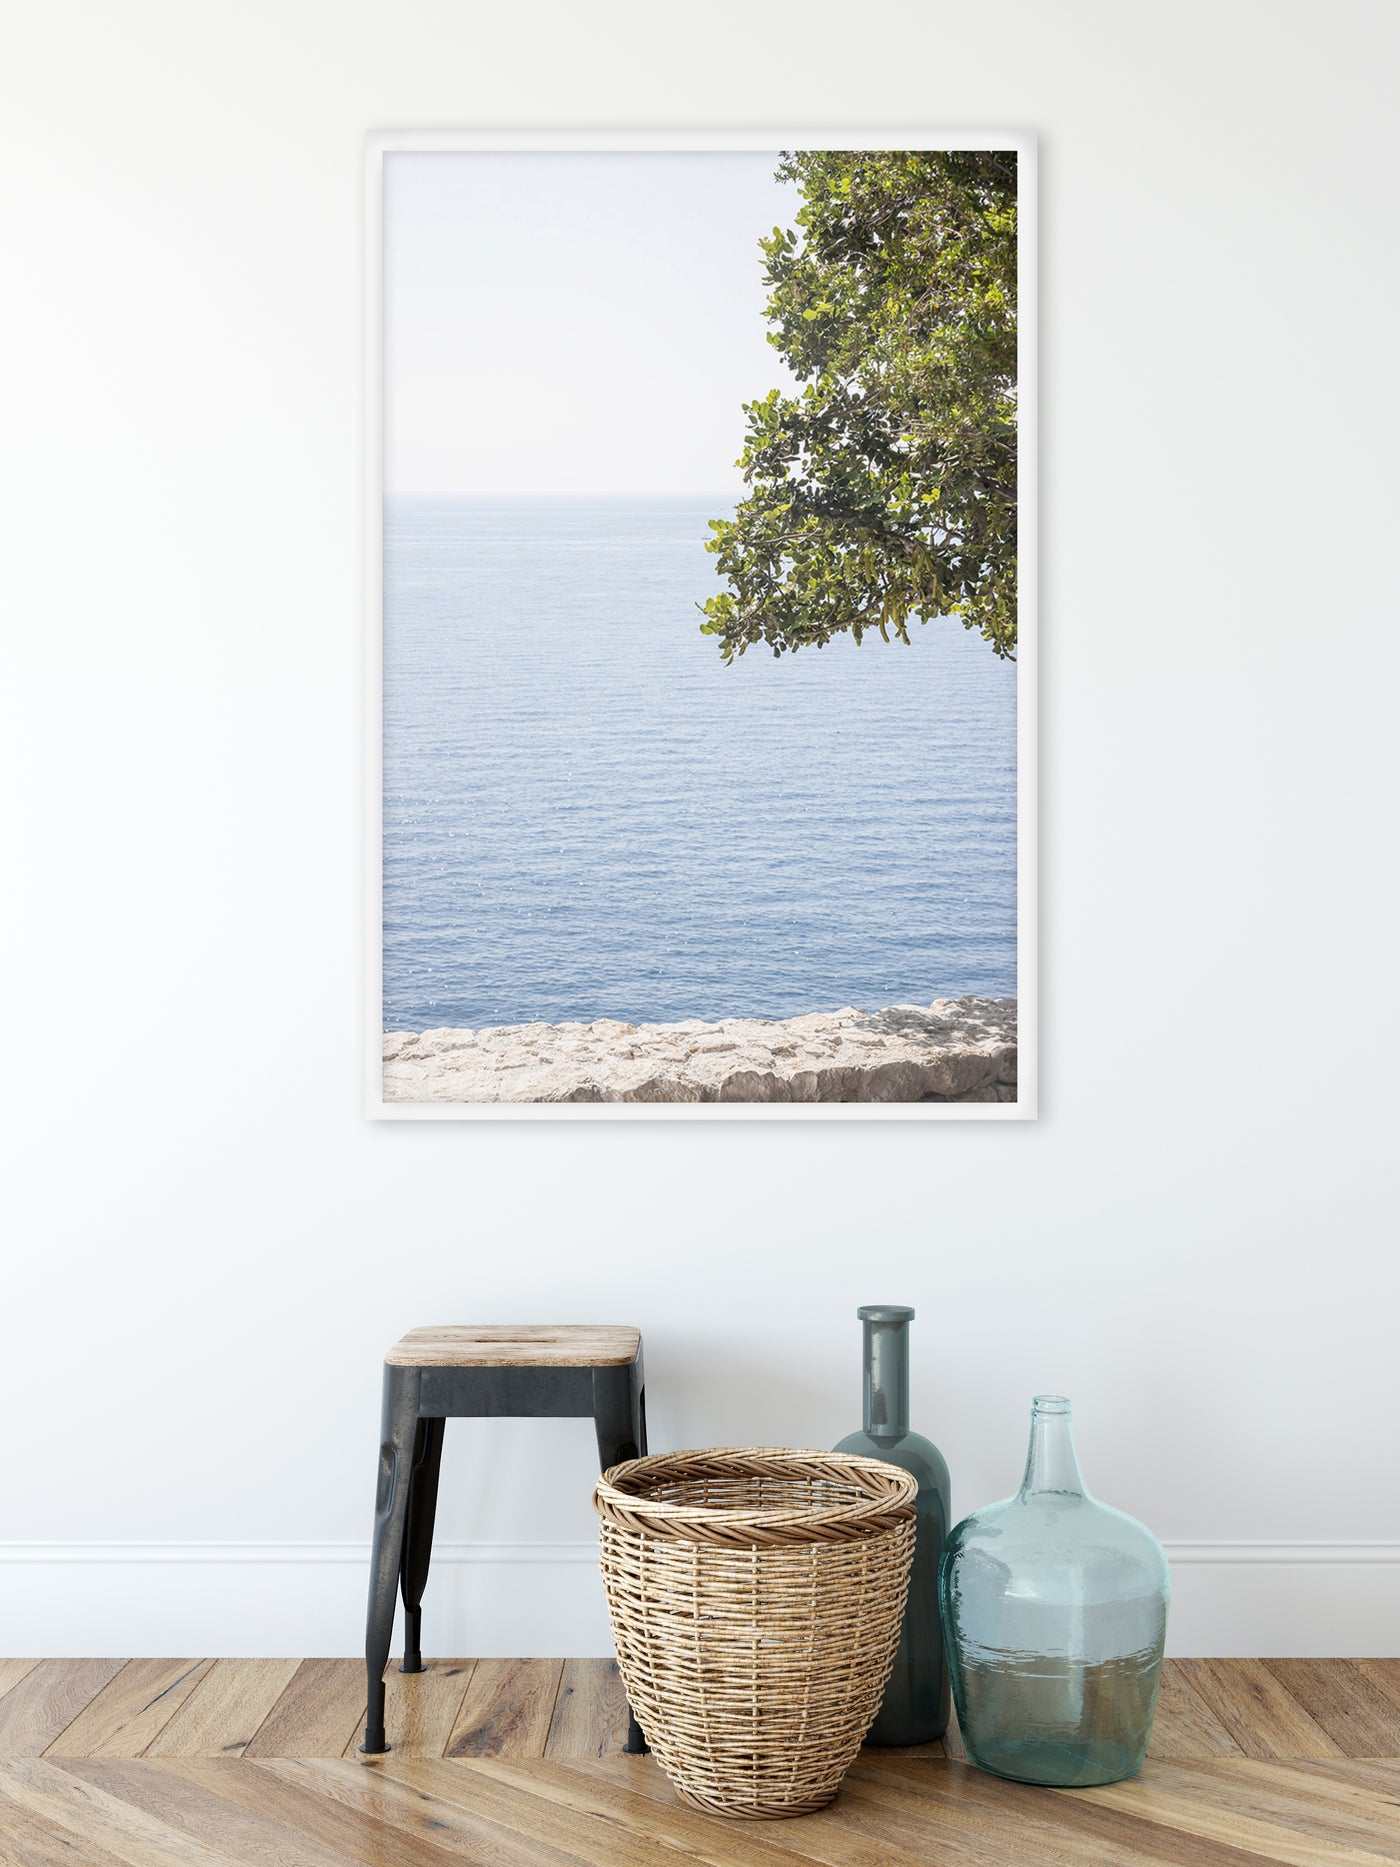 Ocean View – Large framed art print by Cattie Coyle Photography